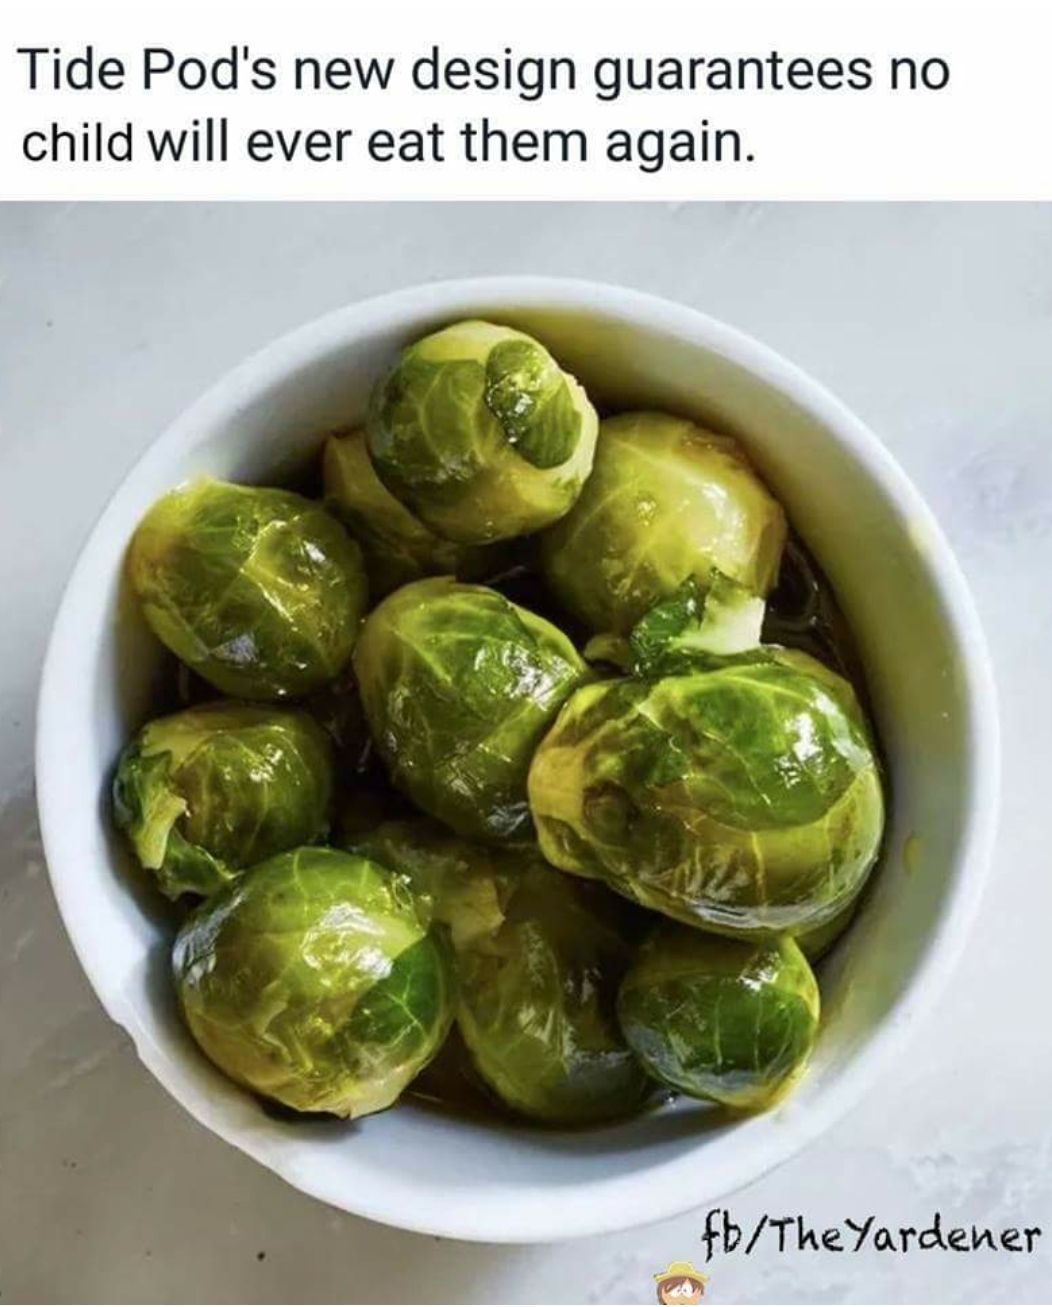 funny picture of tide pod meme joking that if they looked like brussel sprouts, kids would not eat them